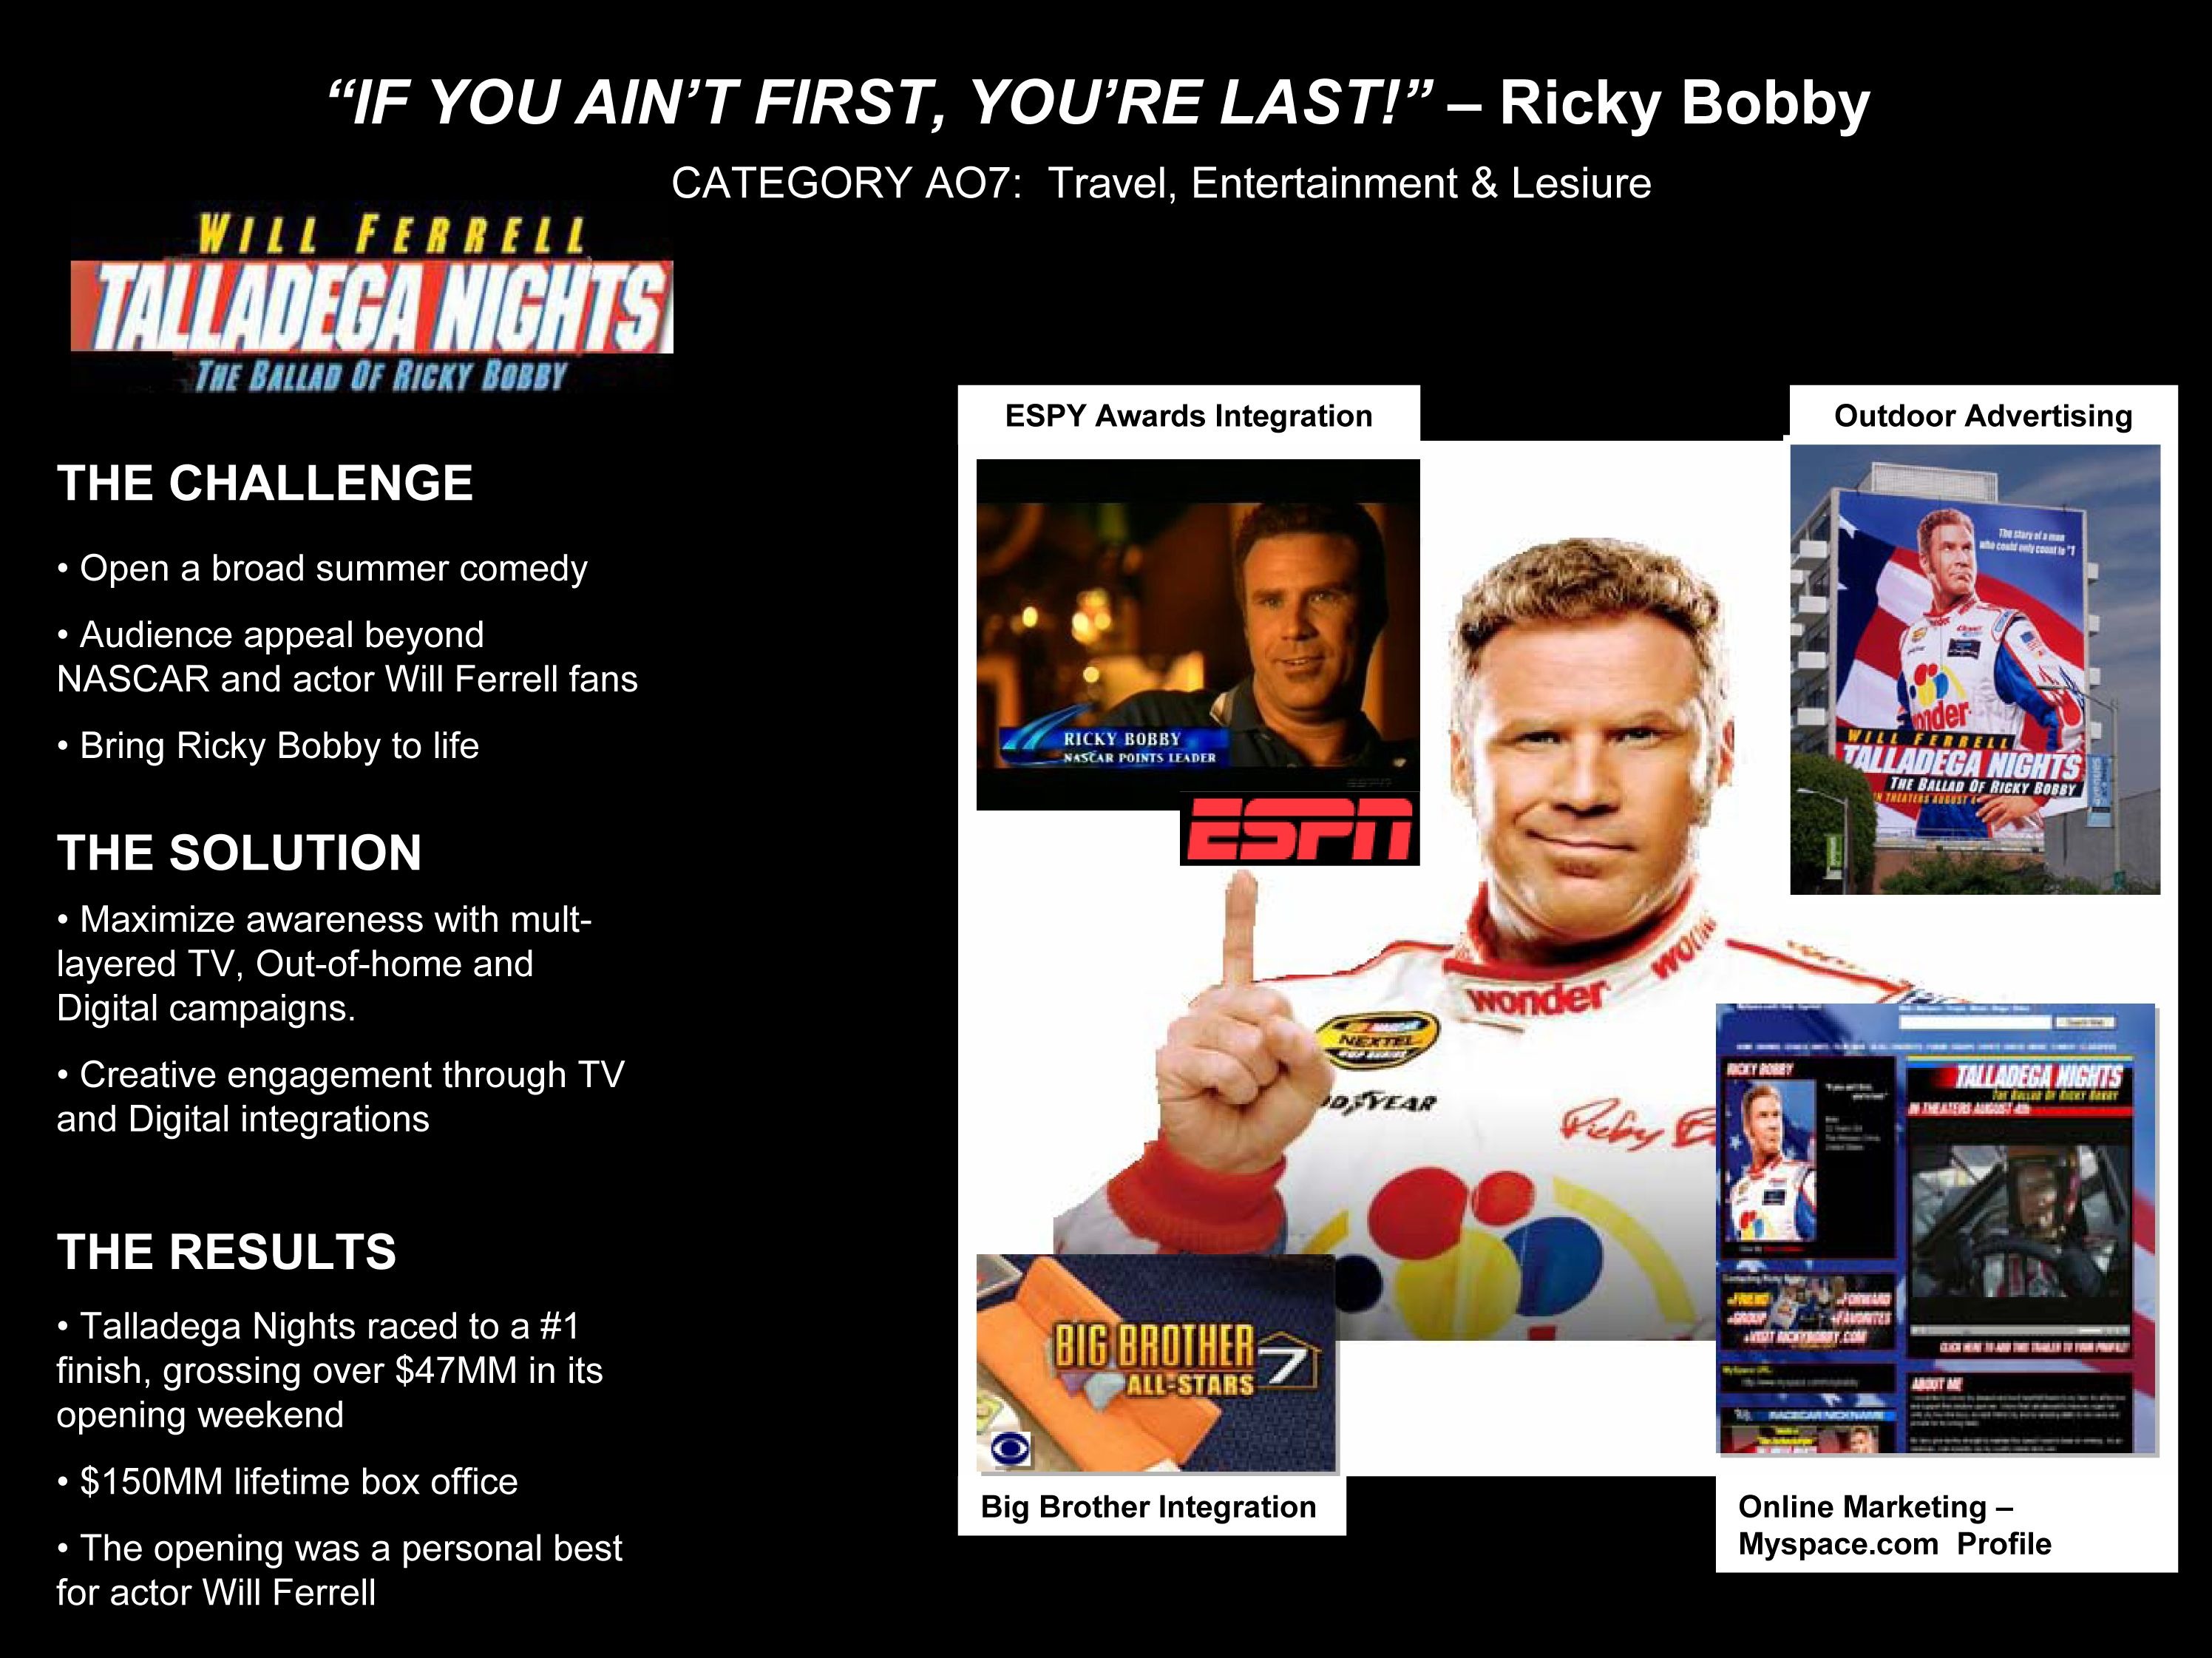 TALLADEGA NIGHTS: THE BALLAD OF RICKY BOBBY MOTION PICTURE